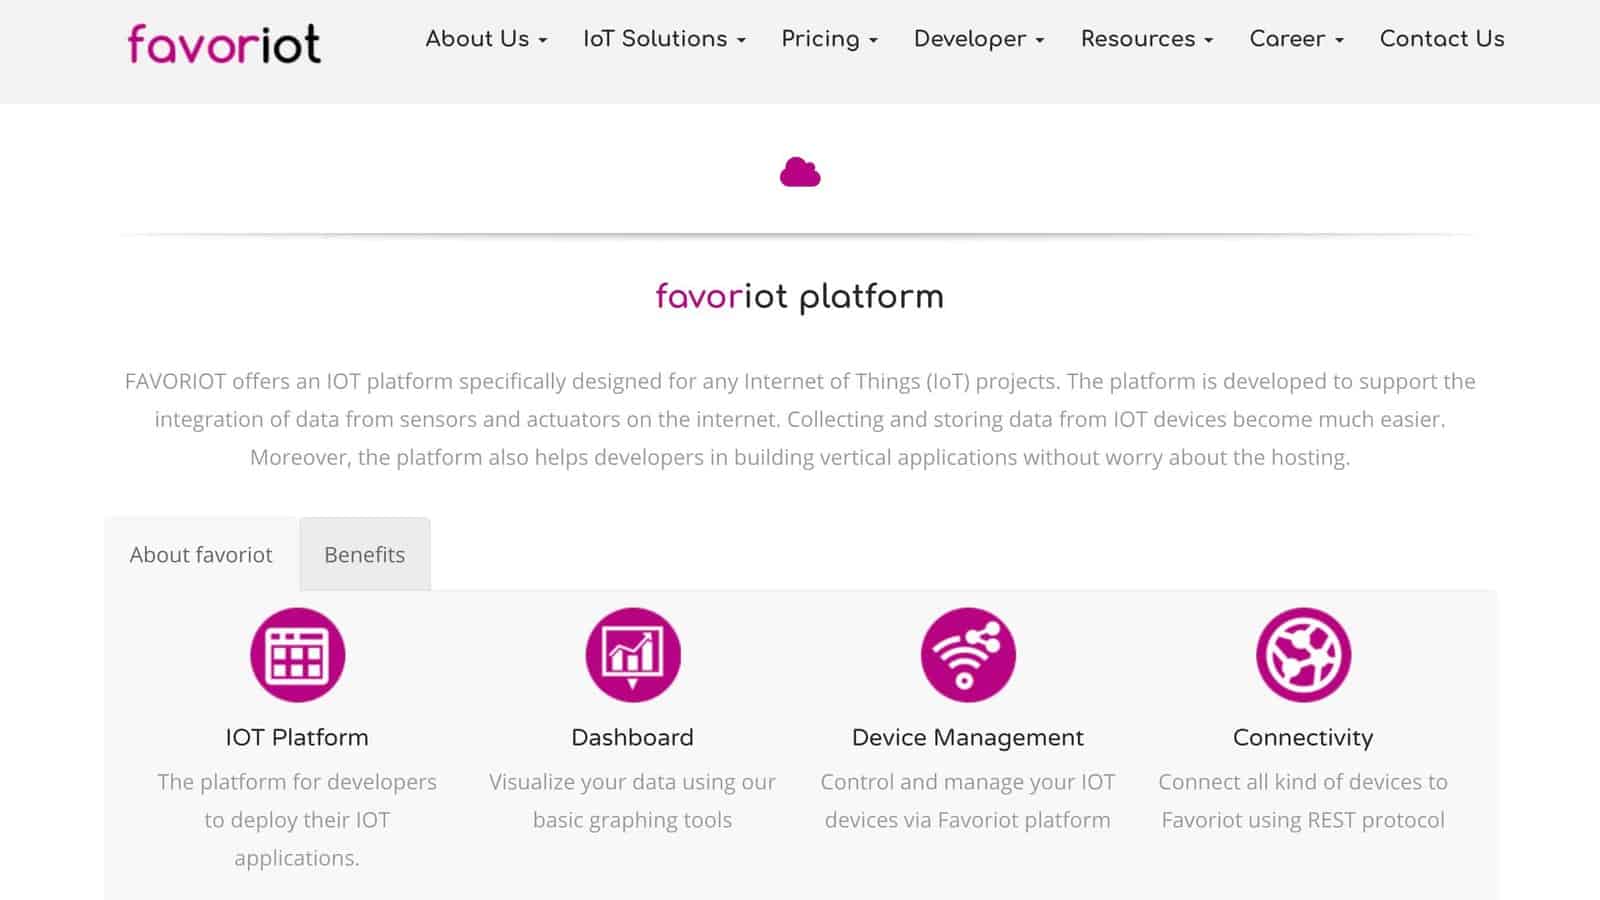 Getting Started With Favoriot IoT Platform Using Raspberry Pi